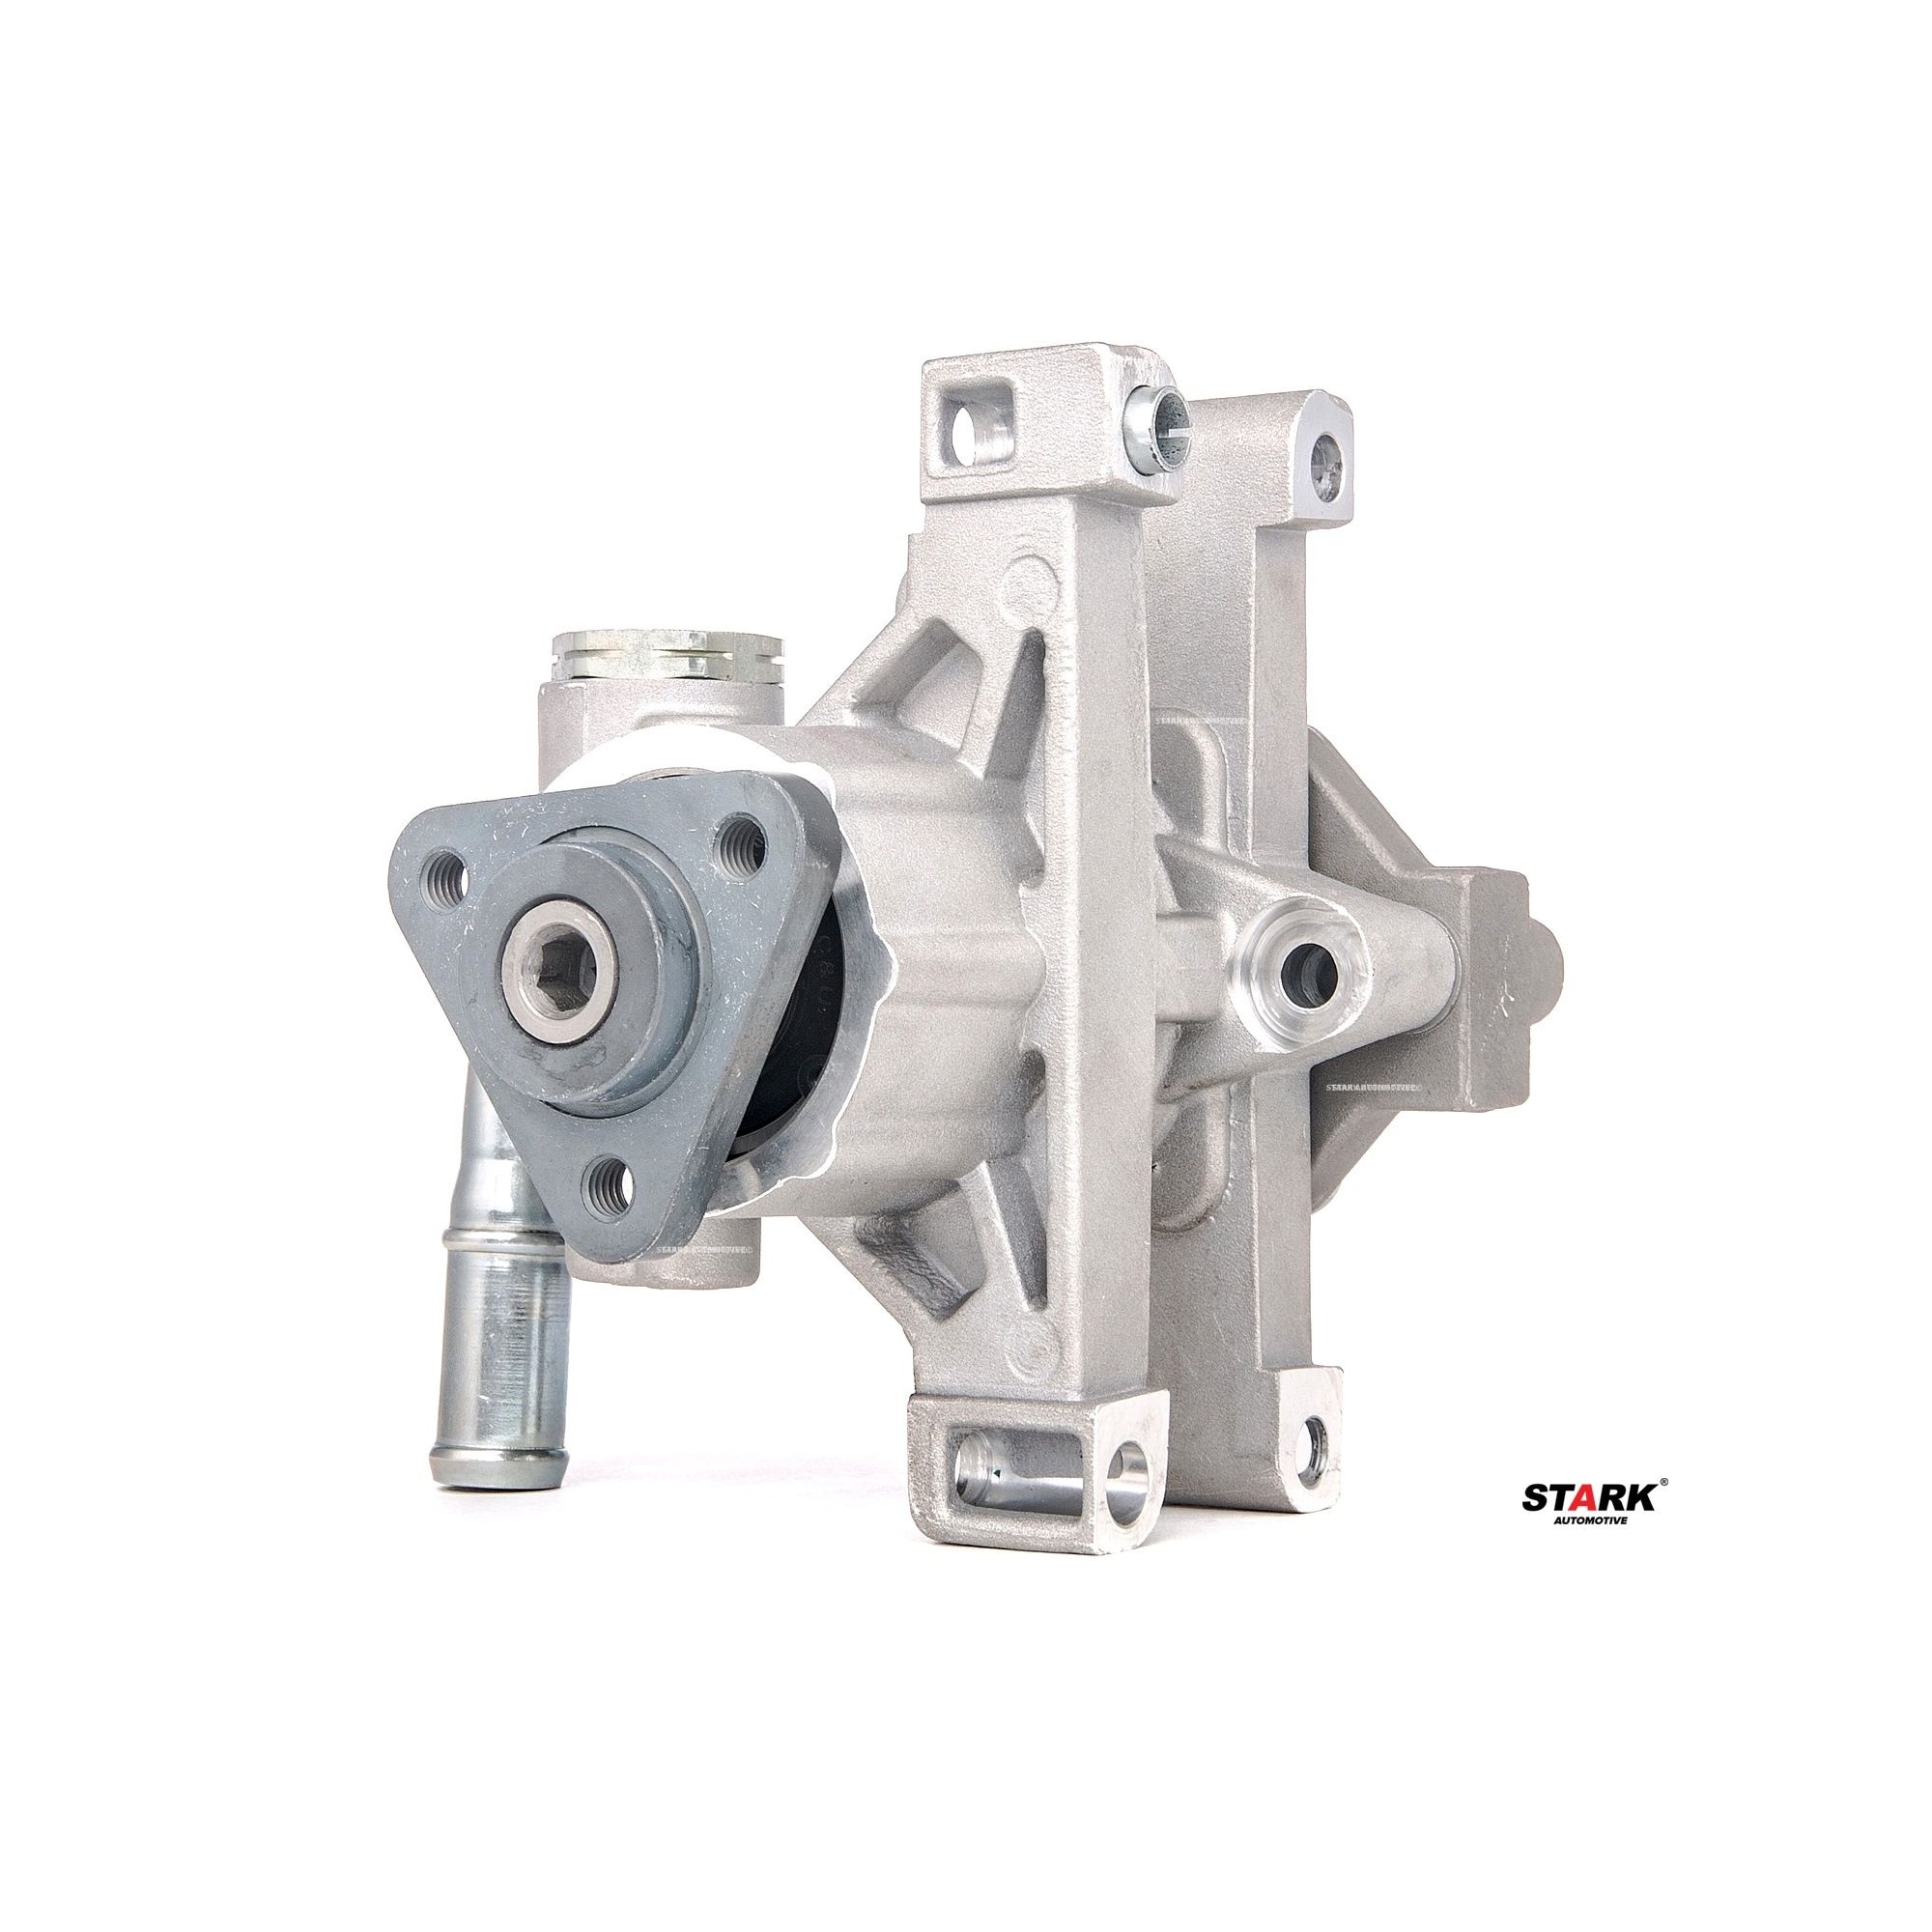 STARK SKHP-0540118 Power steering pump Hydraulic, 115 bar, M16x1.5, 70 l/h, triangular, for left-hand/right-hand drive vehicles